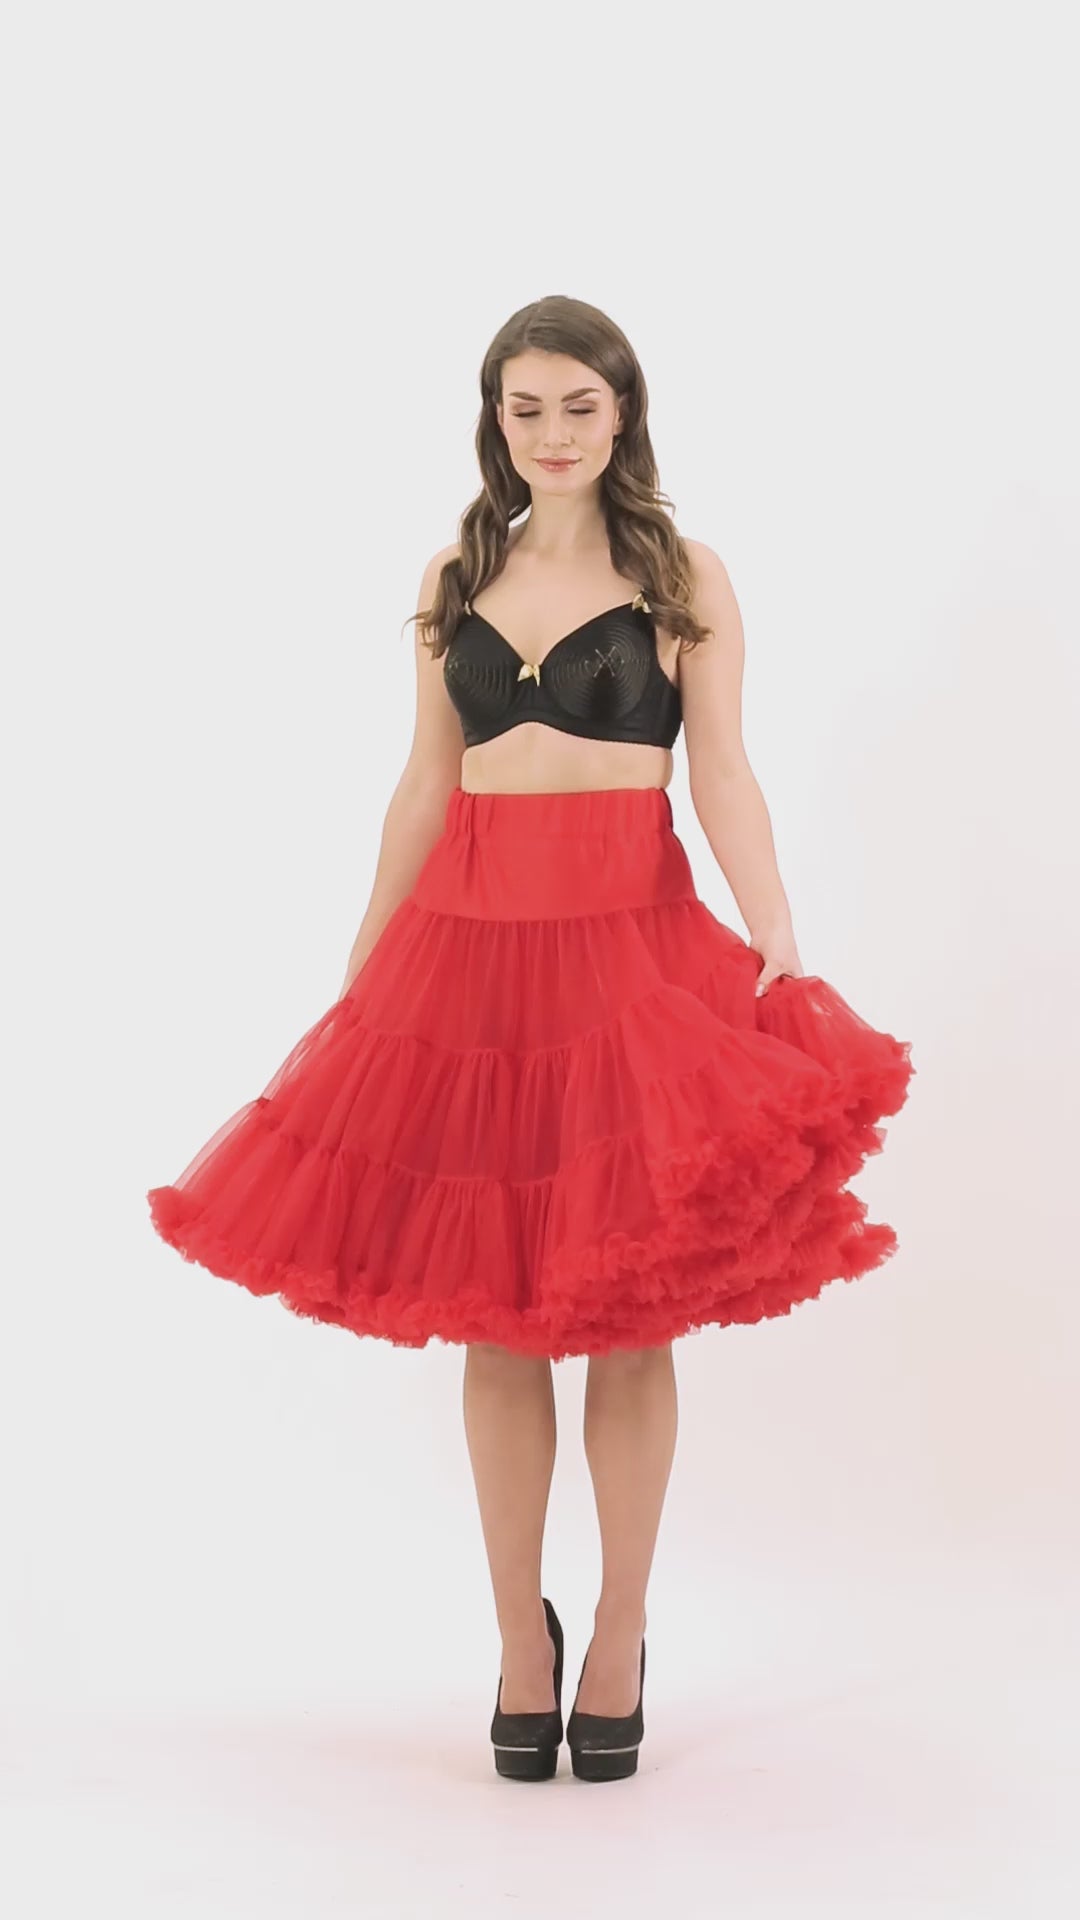 Soft & Fluffy Red Petticoat 25.5 Inches - Dolly and Dotty